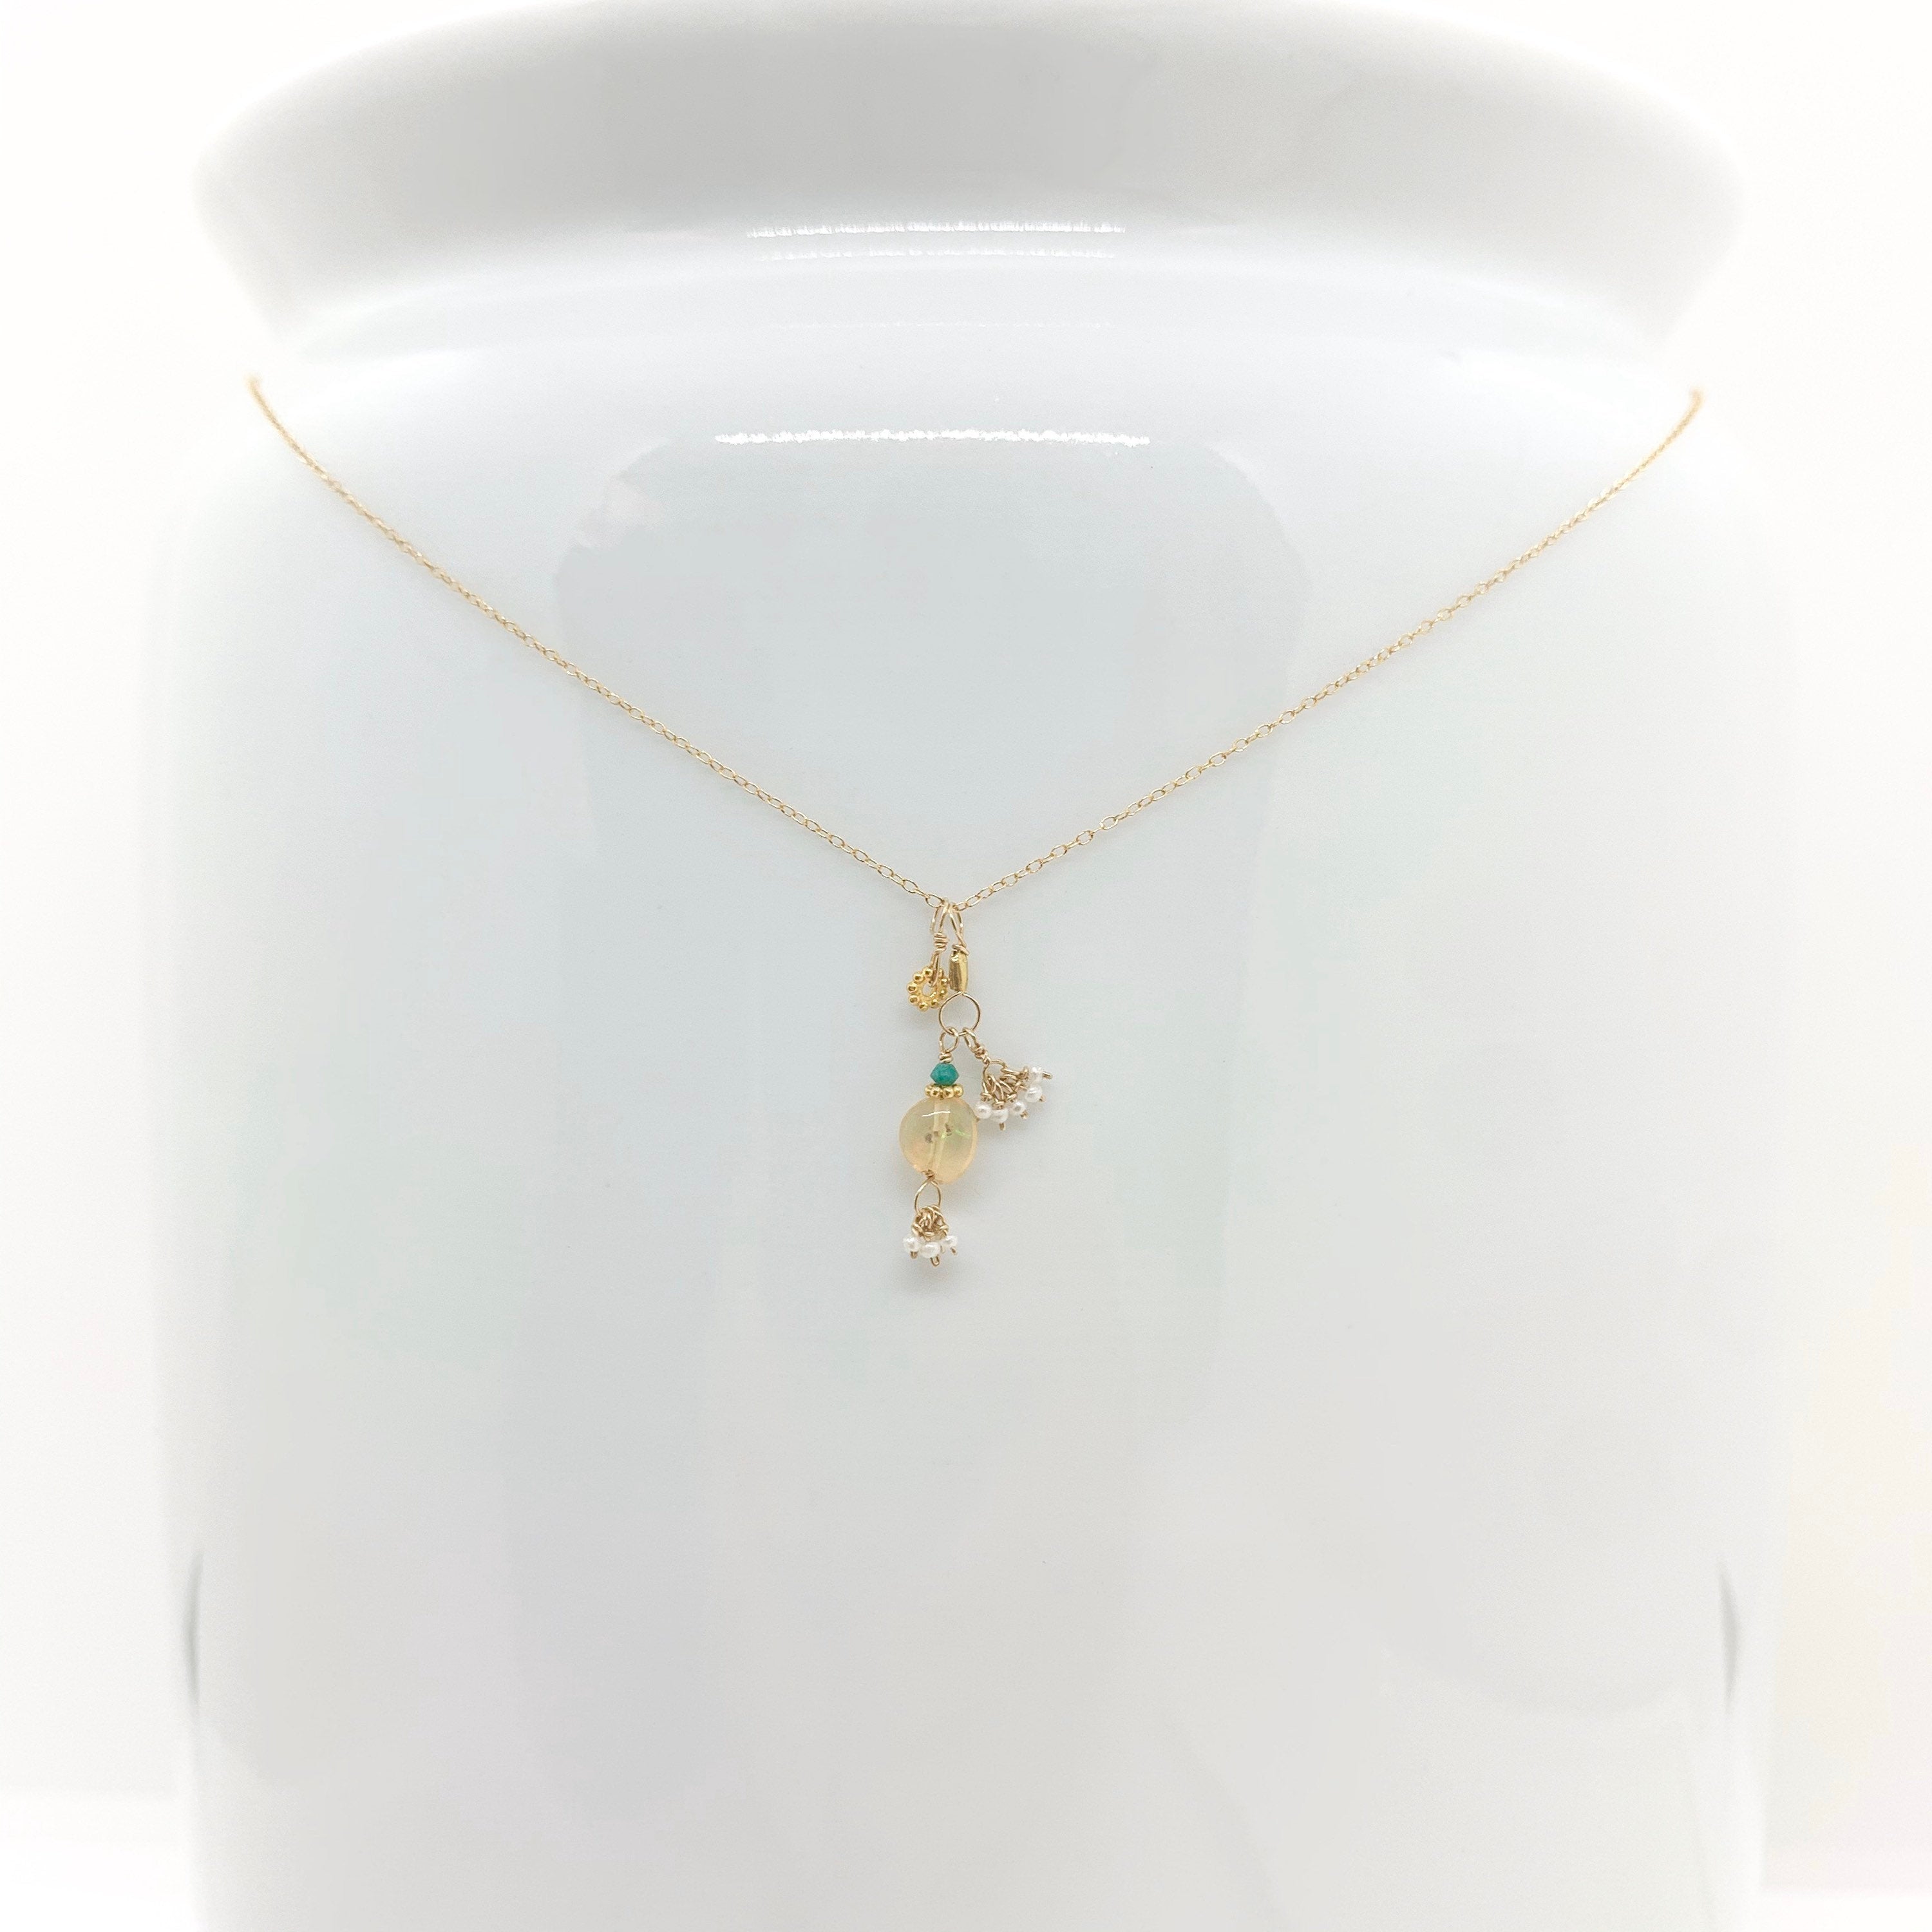 14k Gold Chain Necklace w/ 18k Gold, Turquoise, Freshwater Pearls & Opal